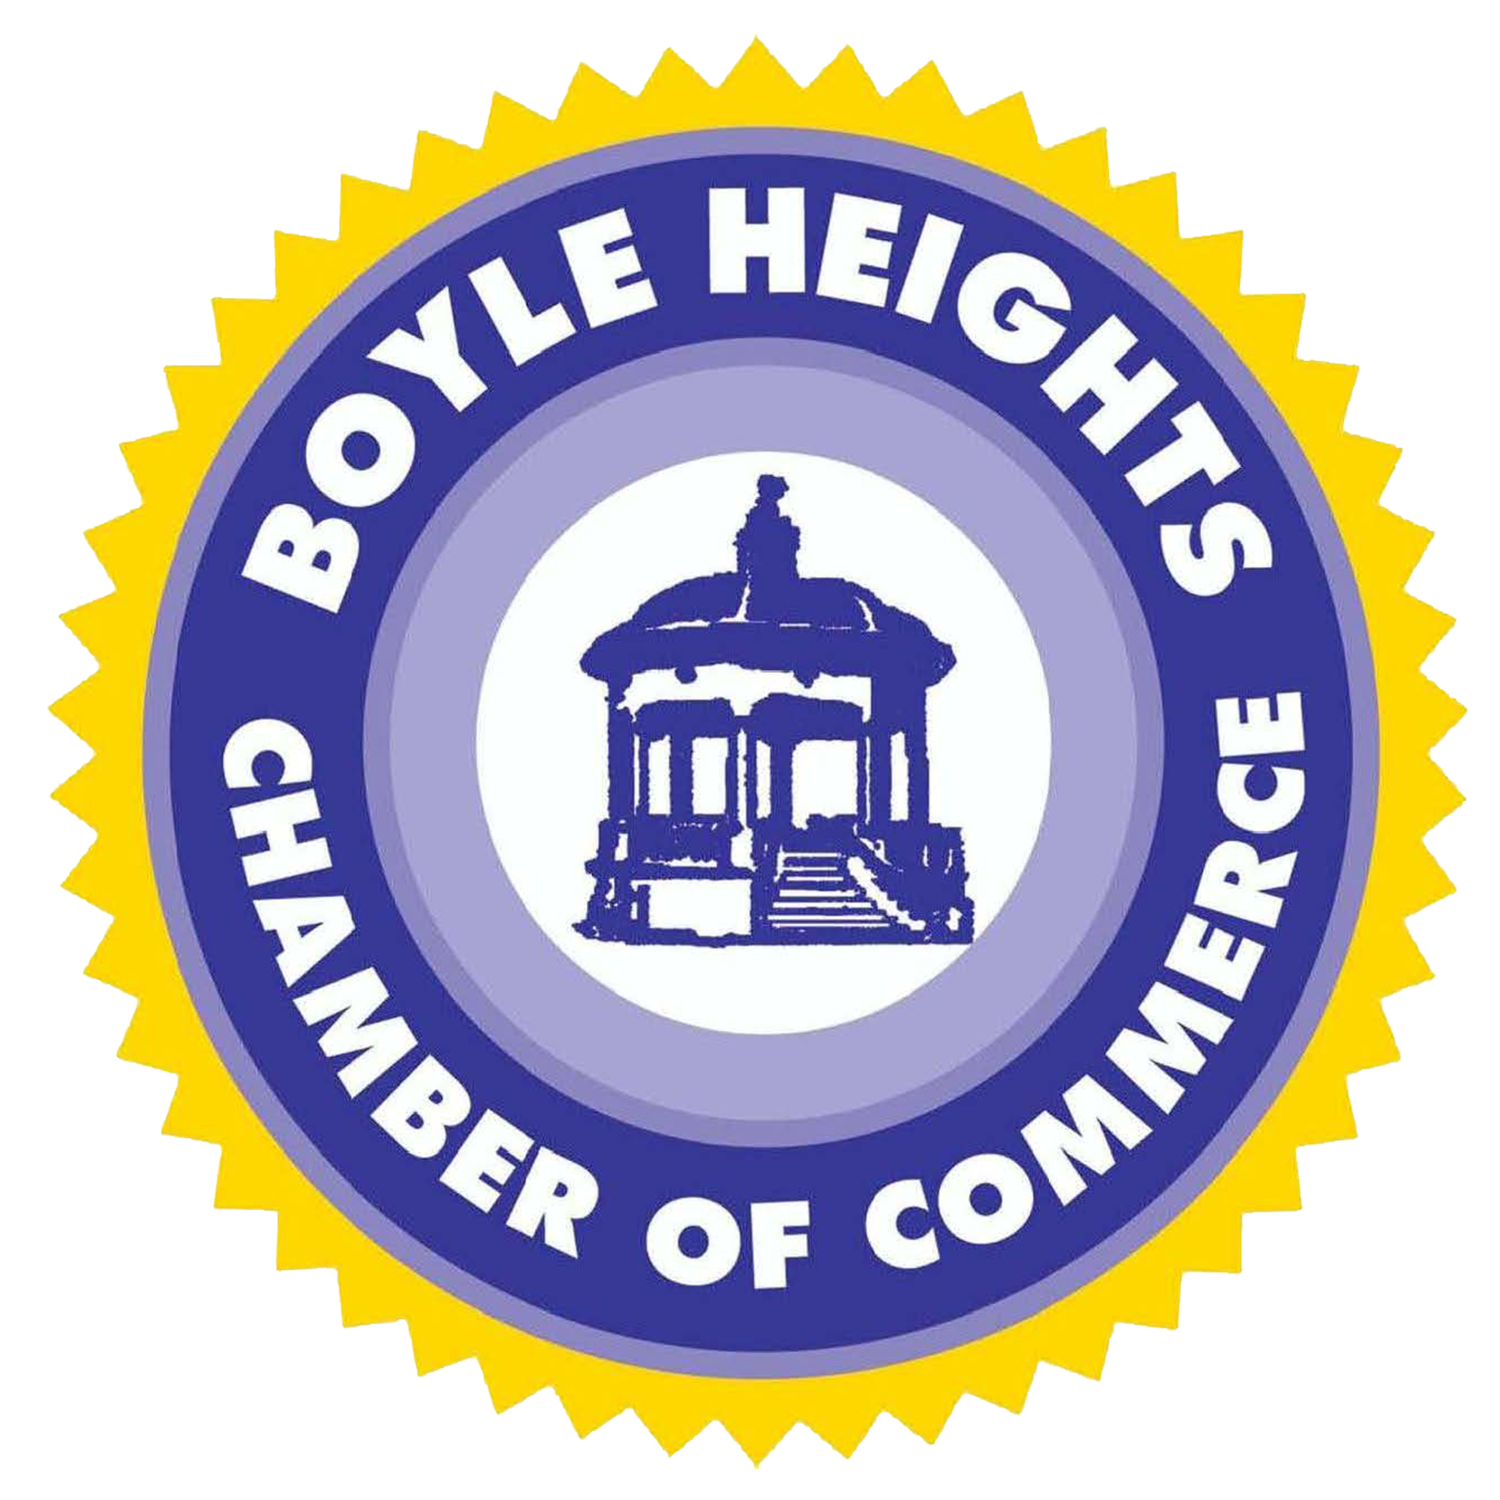 Boyle Heights Chamber of Commerce